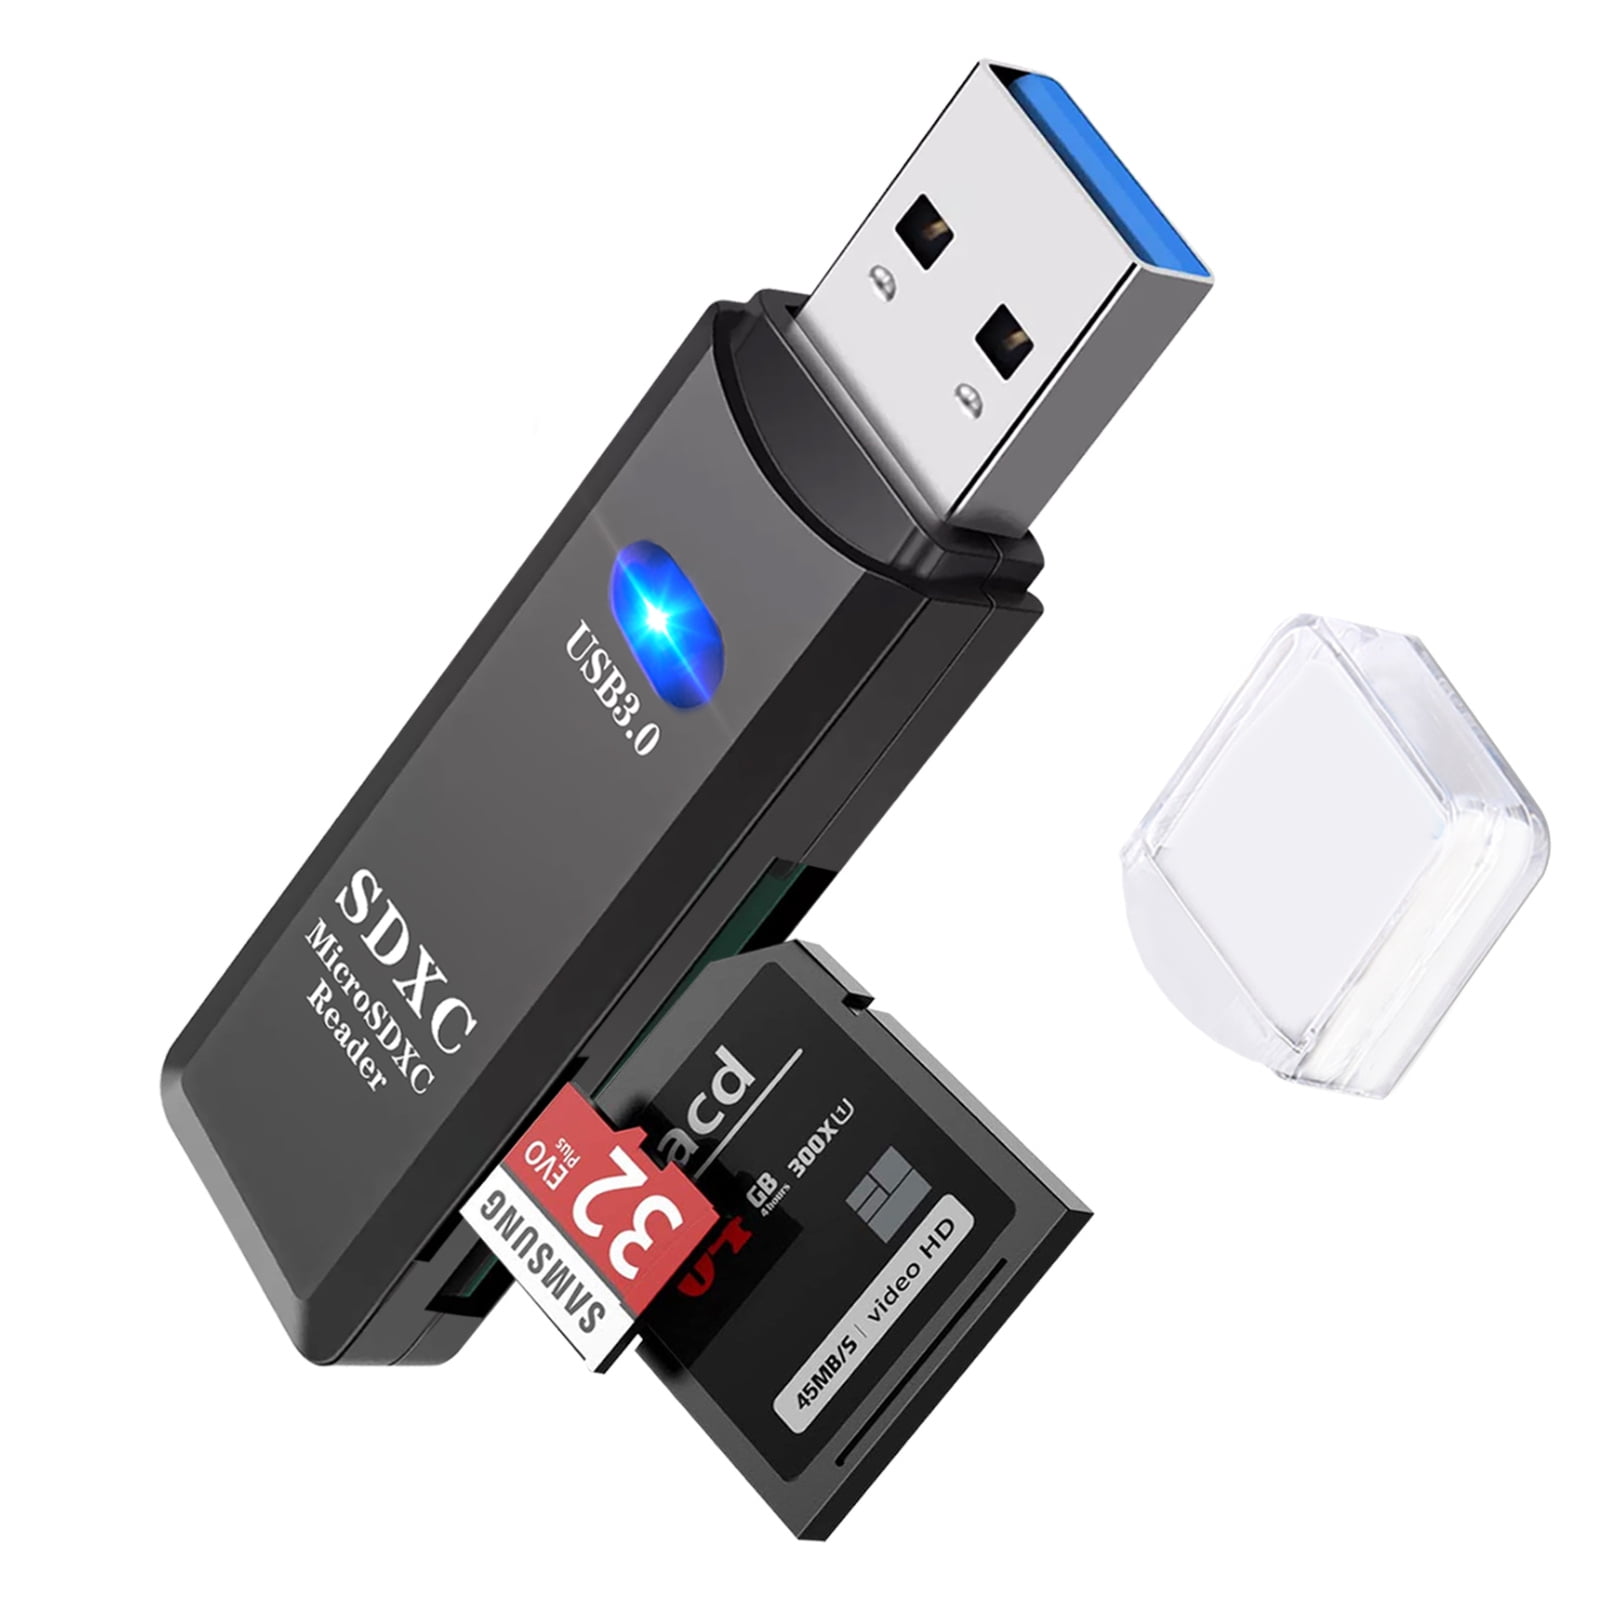 USB Smart Card Reader for SDXC, SDHC, SD, MMC, RS-MMC, All-in-One